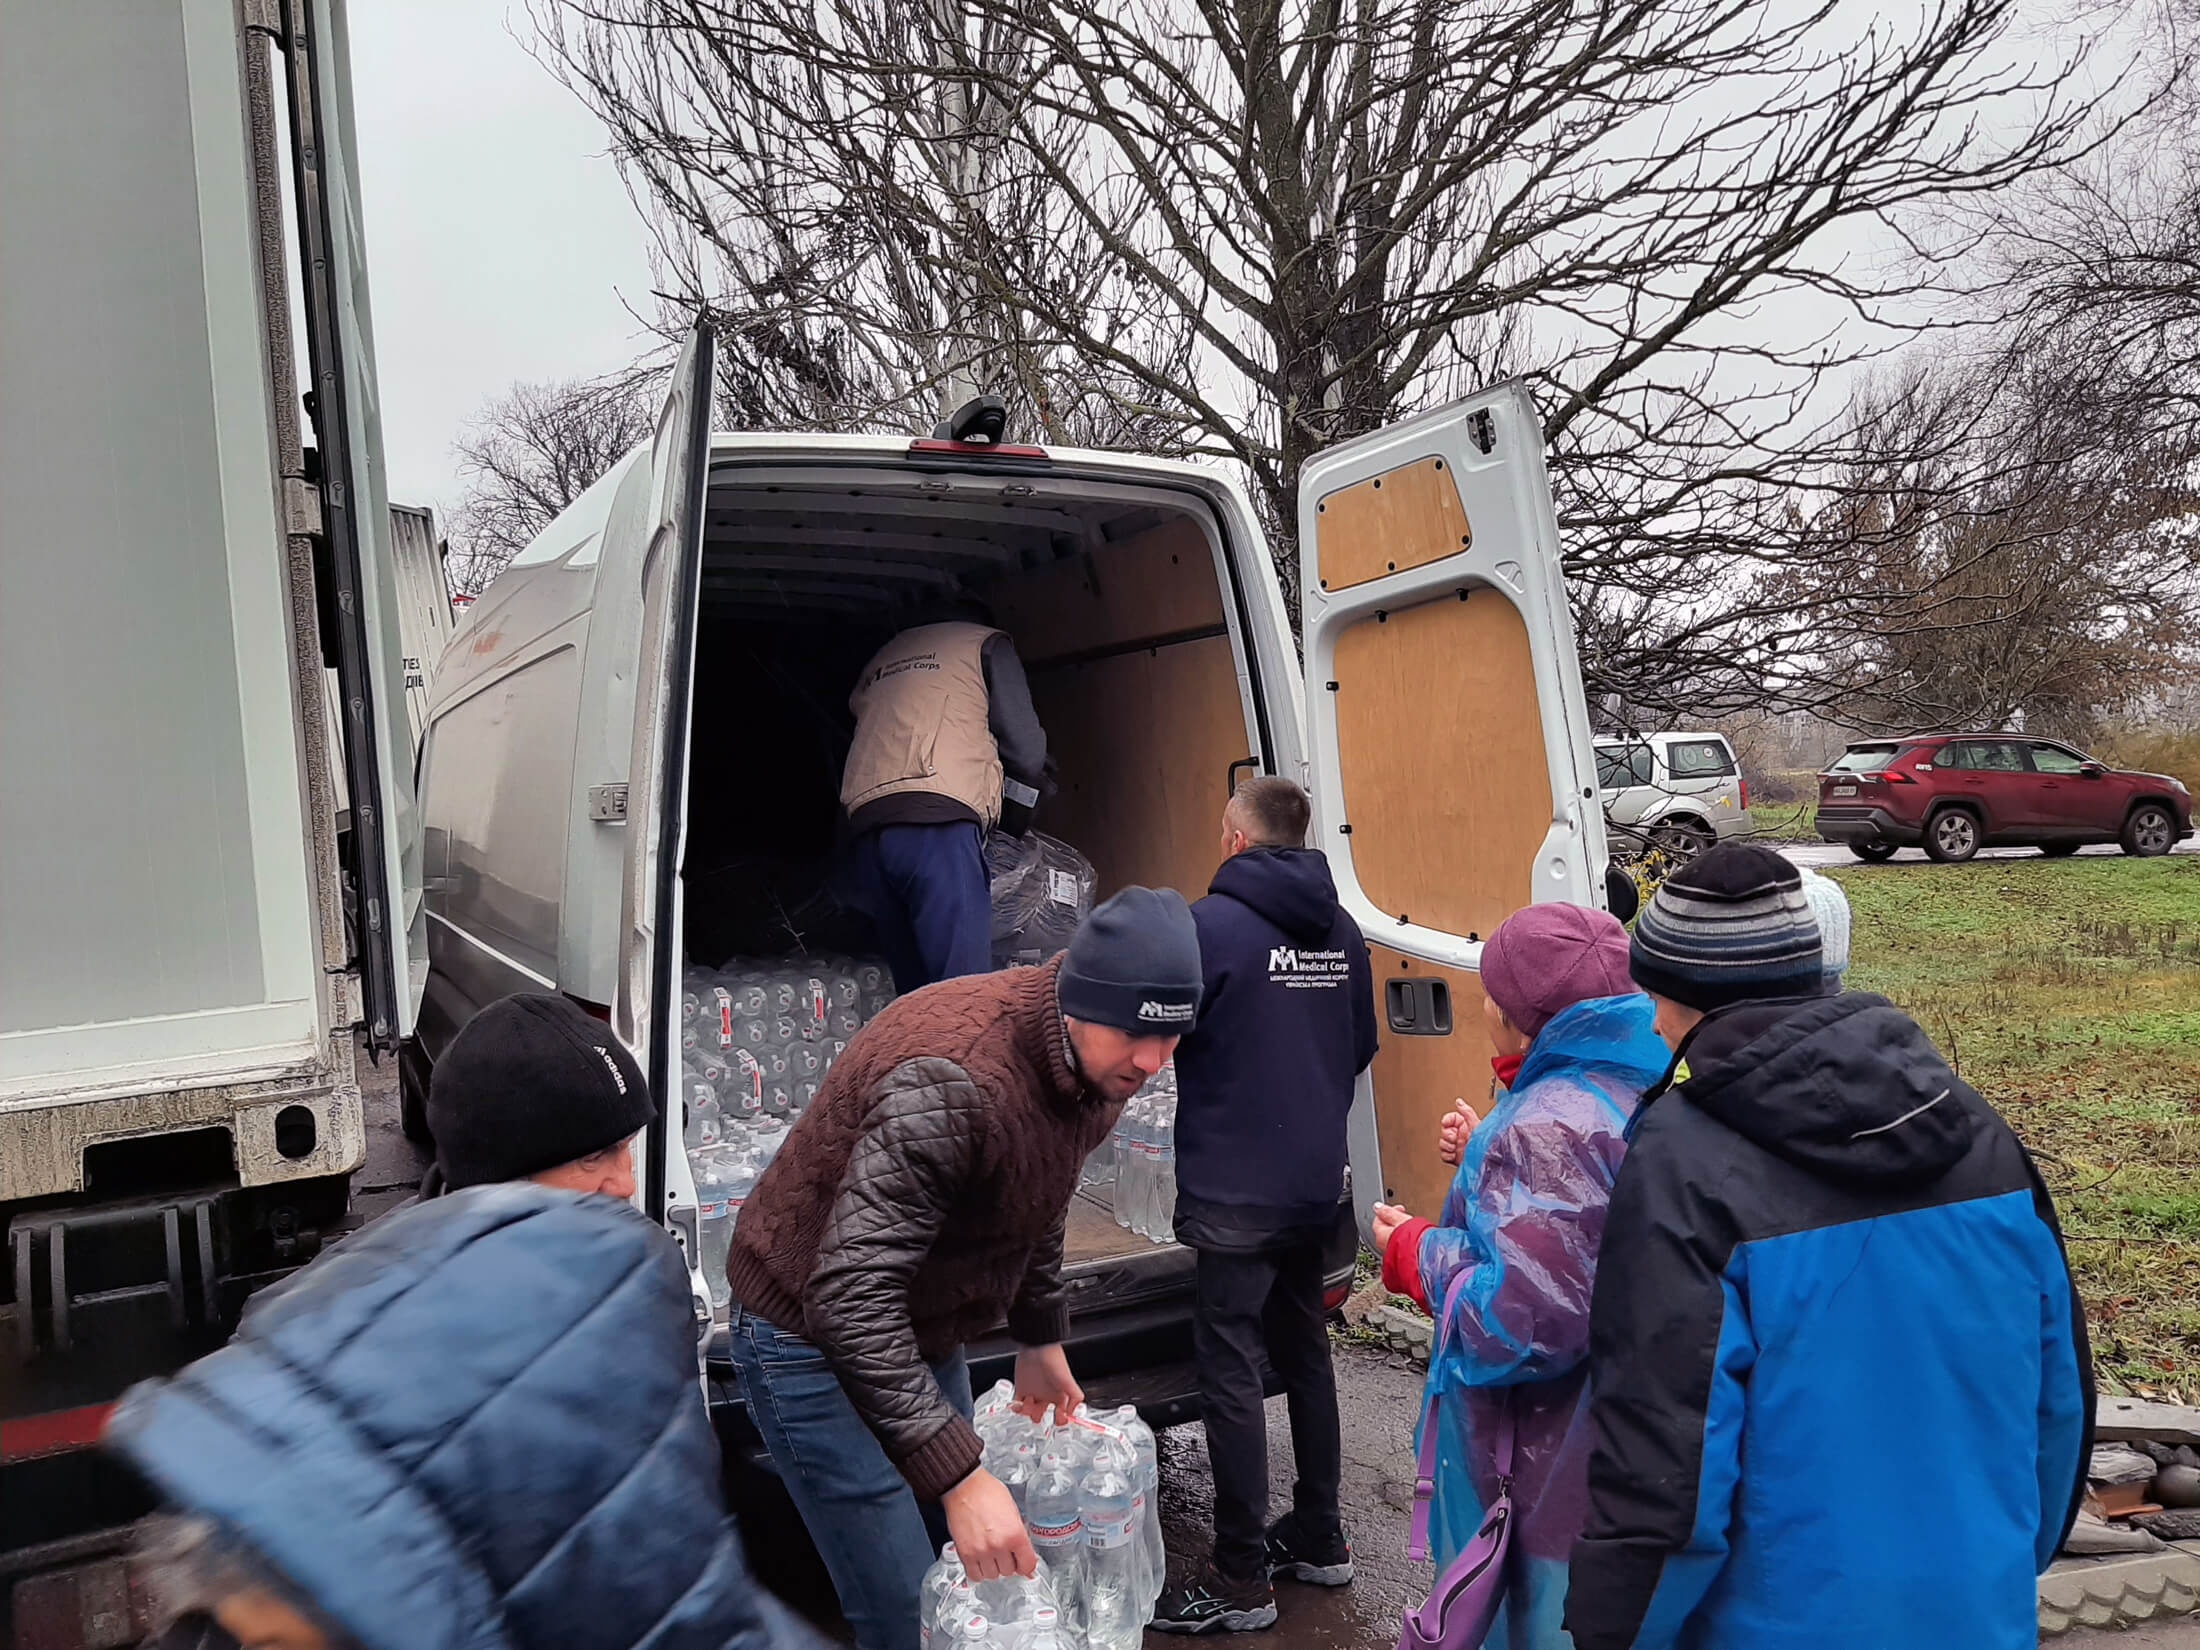 Our team delivered bottled water and blankets to villagers in northern Kherson who had been without electricity and running water for more than eight months. The initial assessment team conducted the distribution two days after the first visit to the area, in November 2022.